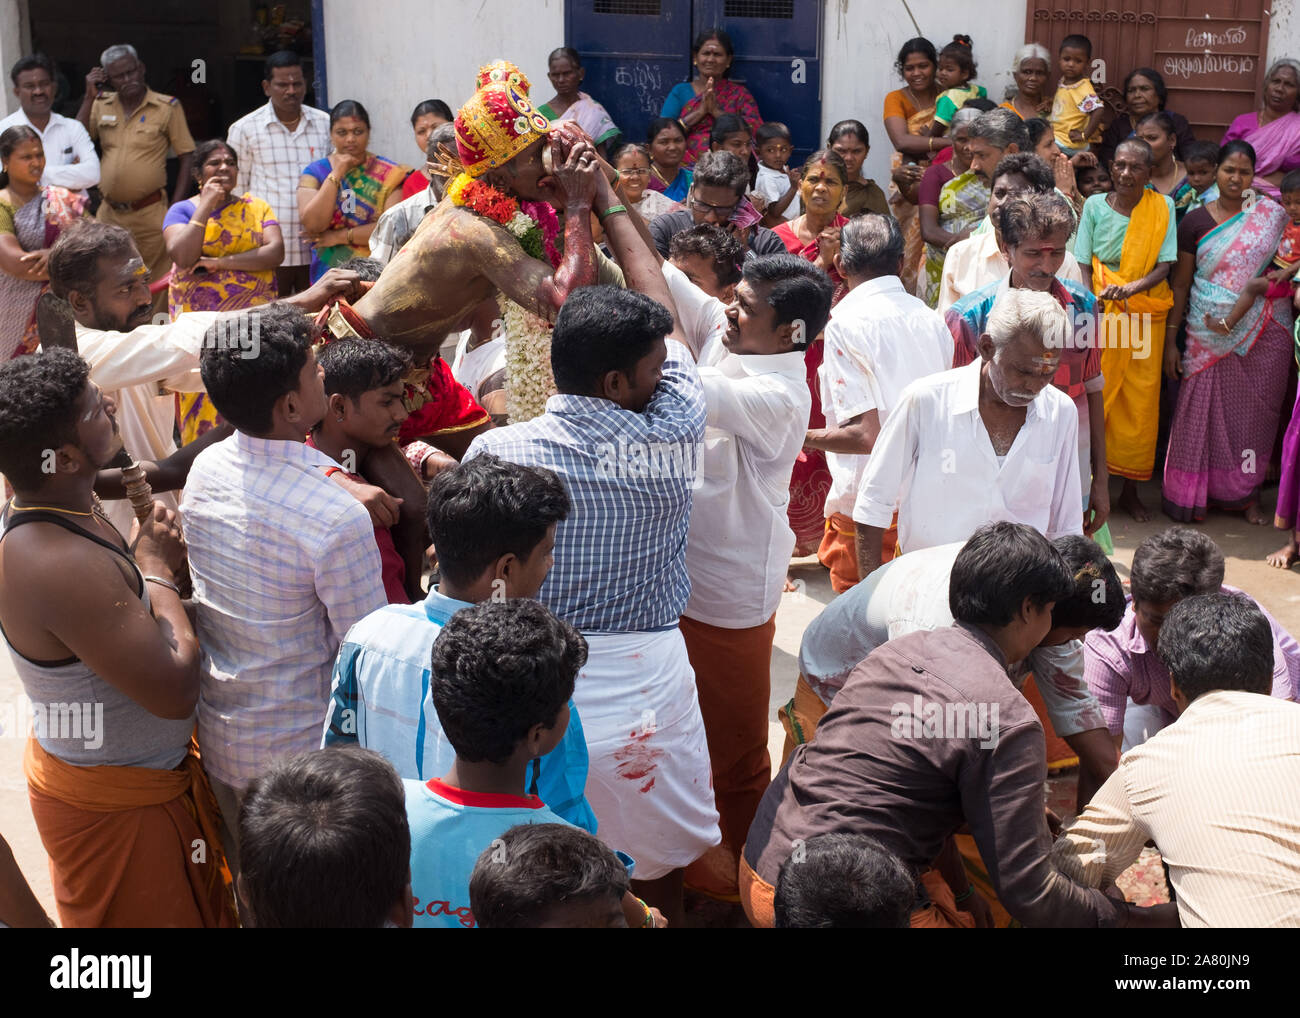 Priest on shoulders of devotees drinking the blood of a sacrificed young goat during Kutti Kudithal Festival in Trichy, Tamil Nadu, India Stock Photo